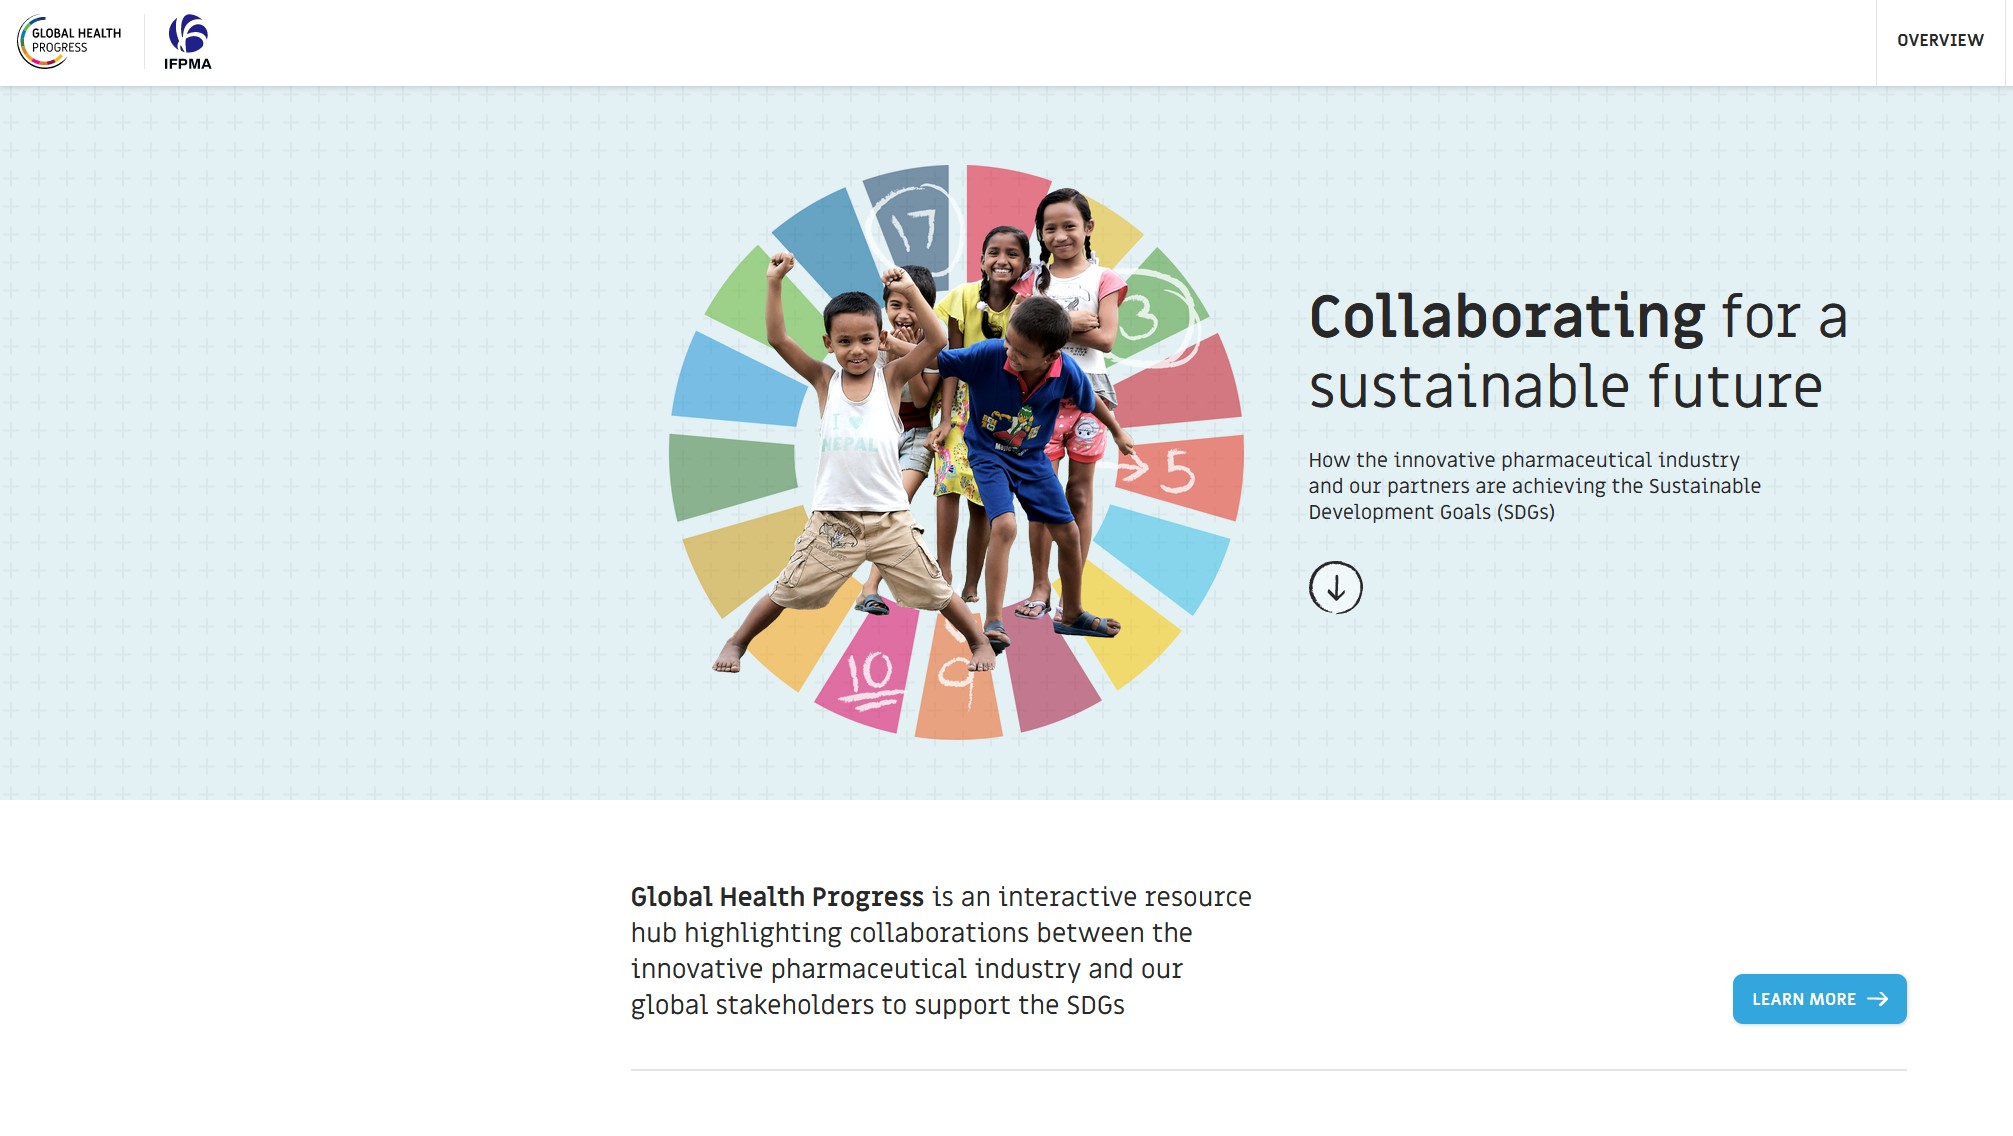 Global Health Progress: Pharmaceutical industry collaborations on NCDs